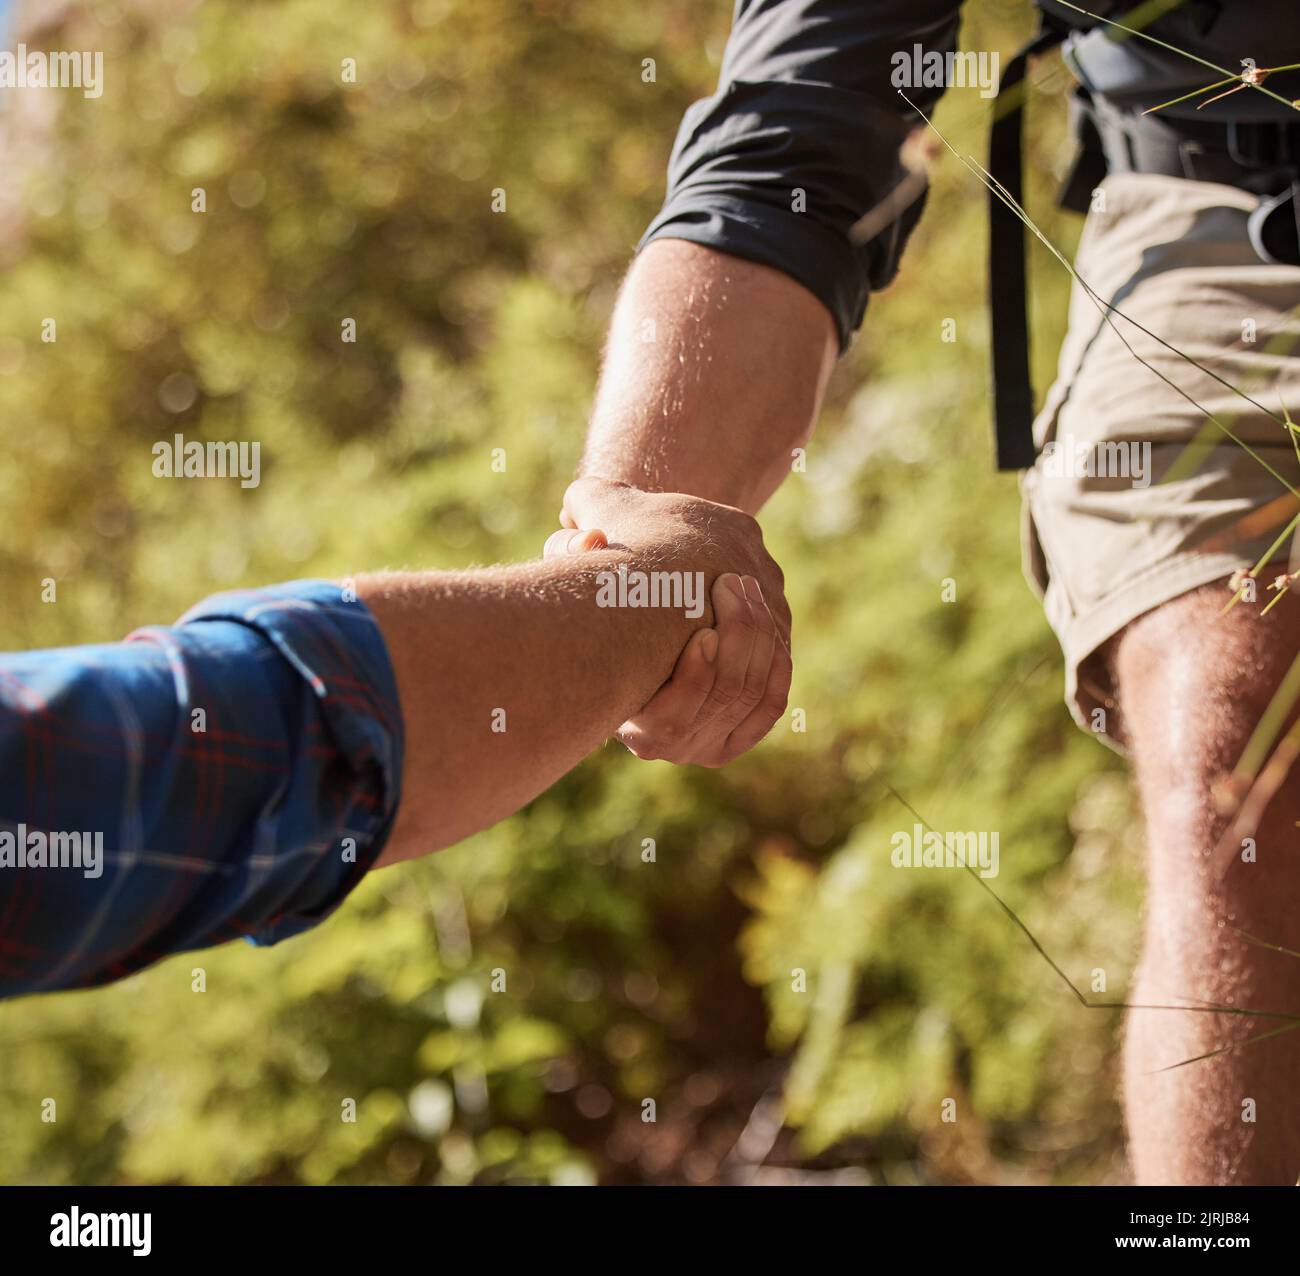 Support, teamwork and helping hands by hikers hiking outdoors in nature on a mountain trail. Fit and active friends help each other closeup and while Stock Photo